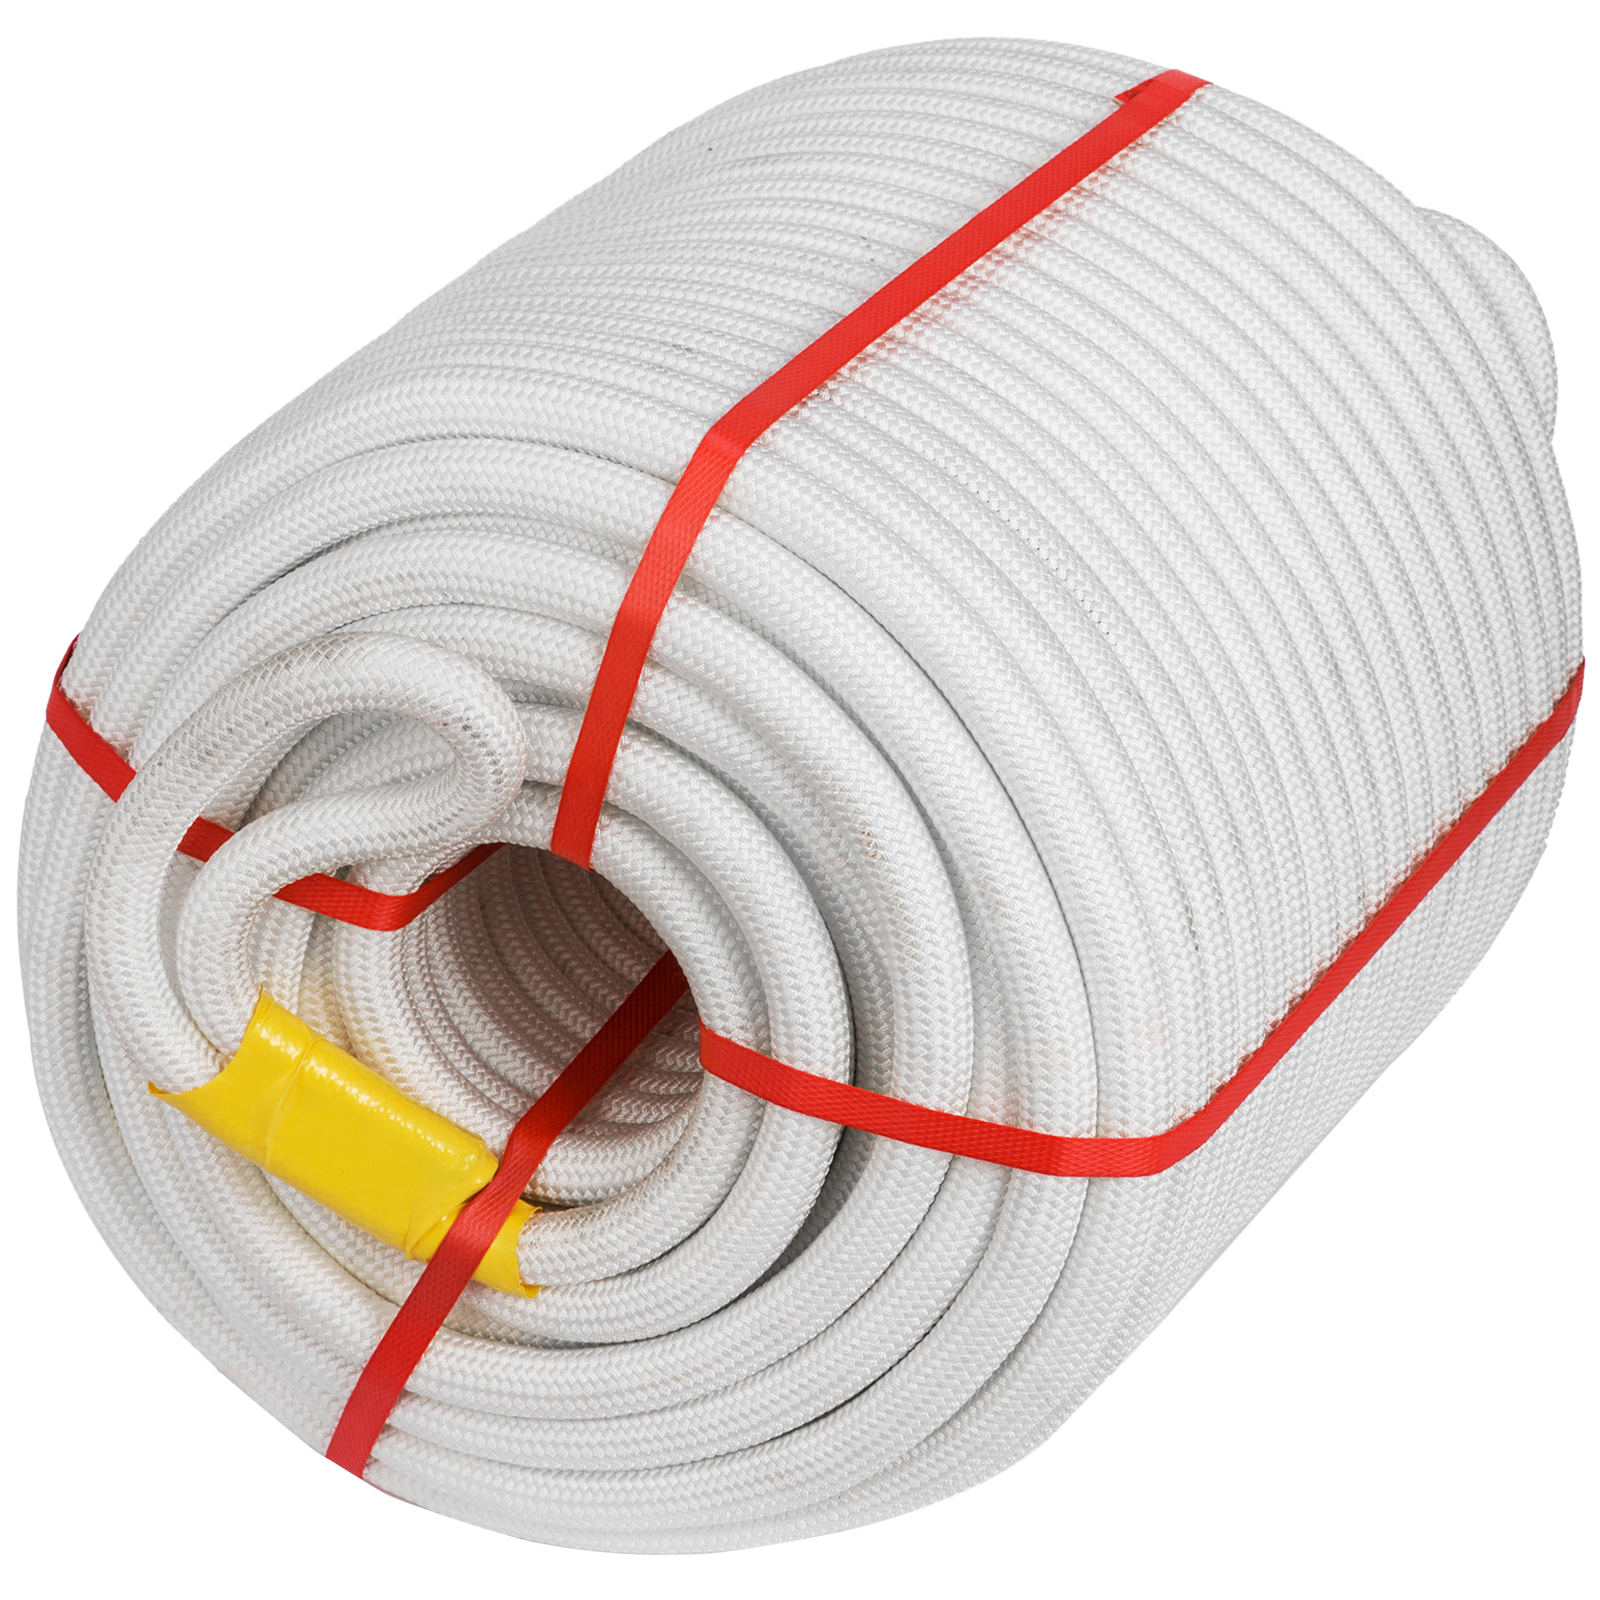 3/8" Double Braid Polyester Rope 300ft 8400 Breaking Strength от Vevor Many GEOs